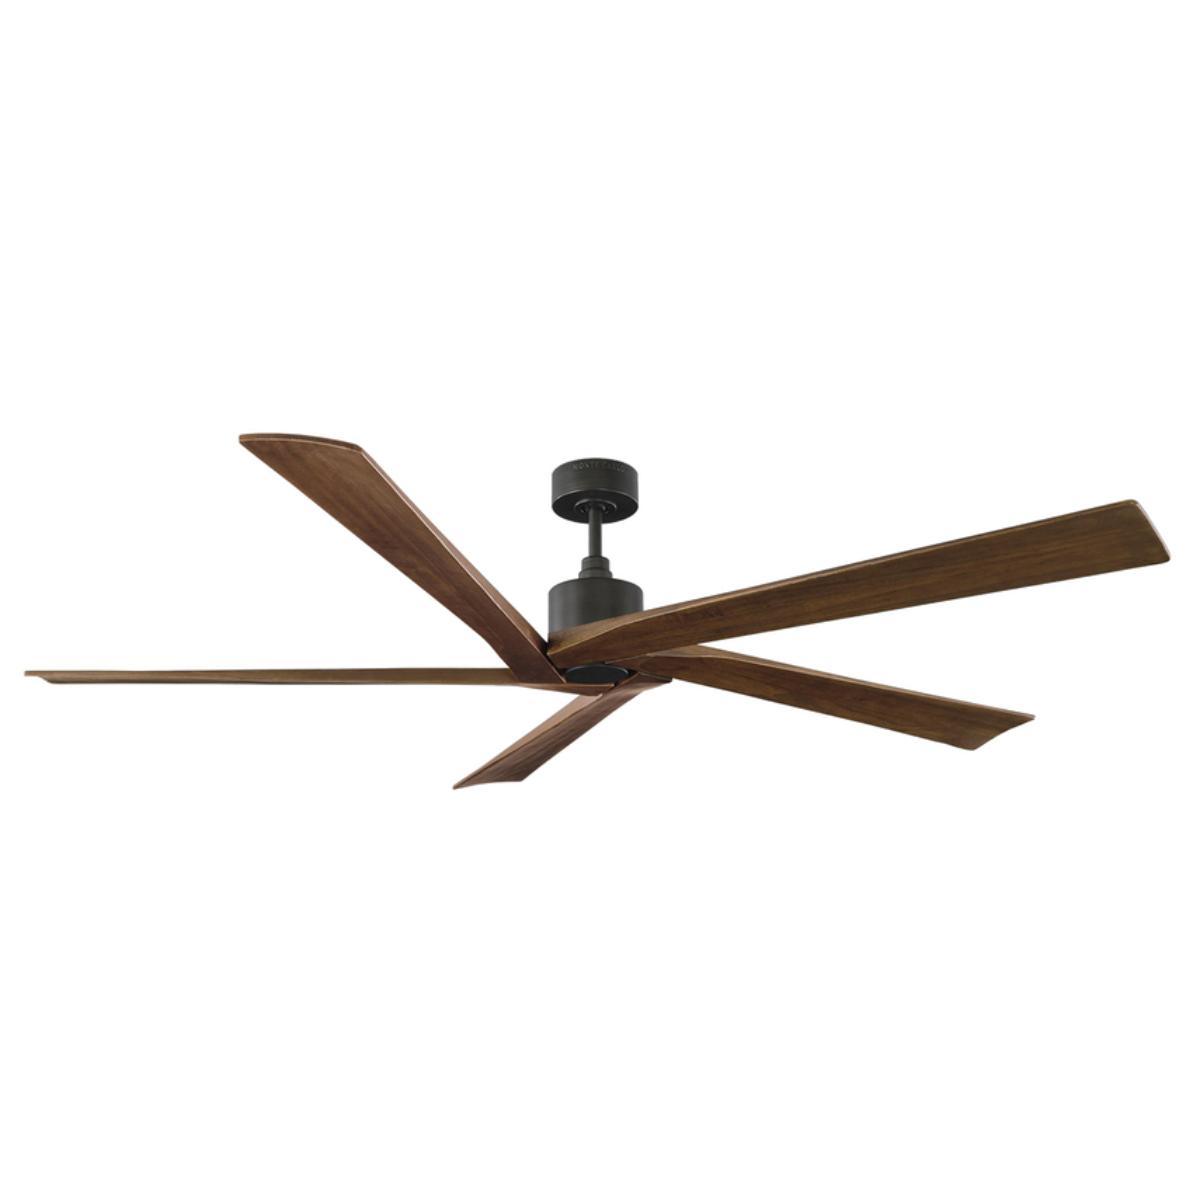 Aspen 70 Inch Ceiling Fan with Remote, Aged Pewter with Dark Walnut Blades - Bees Lighting